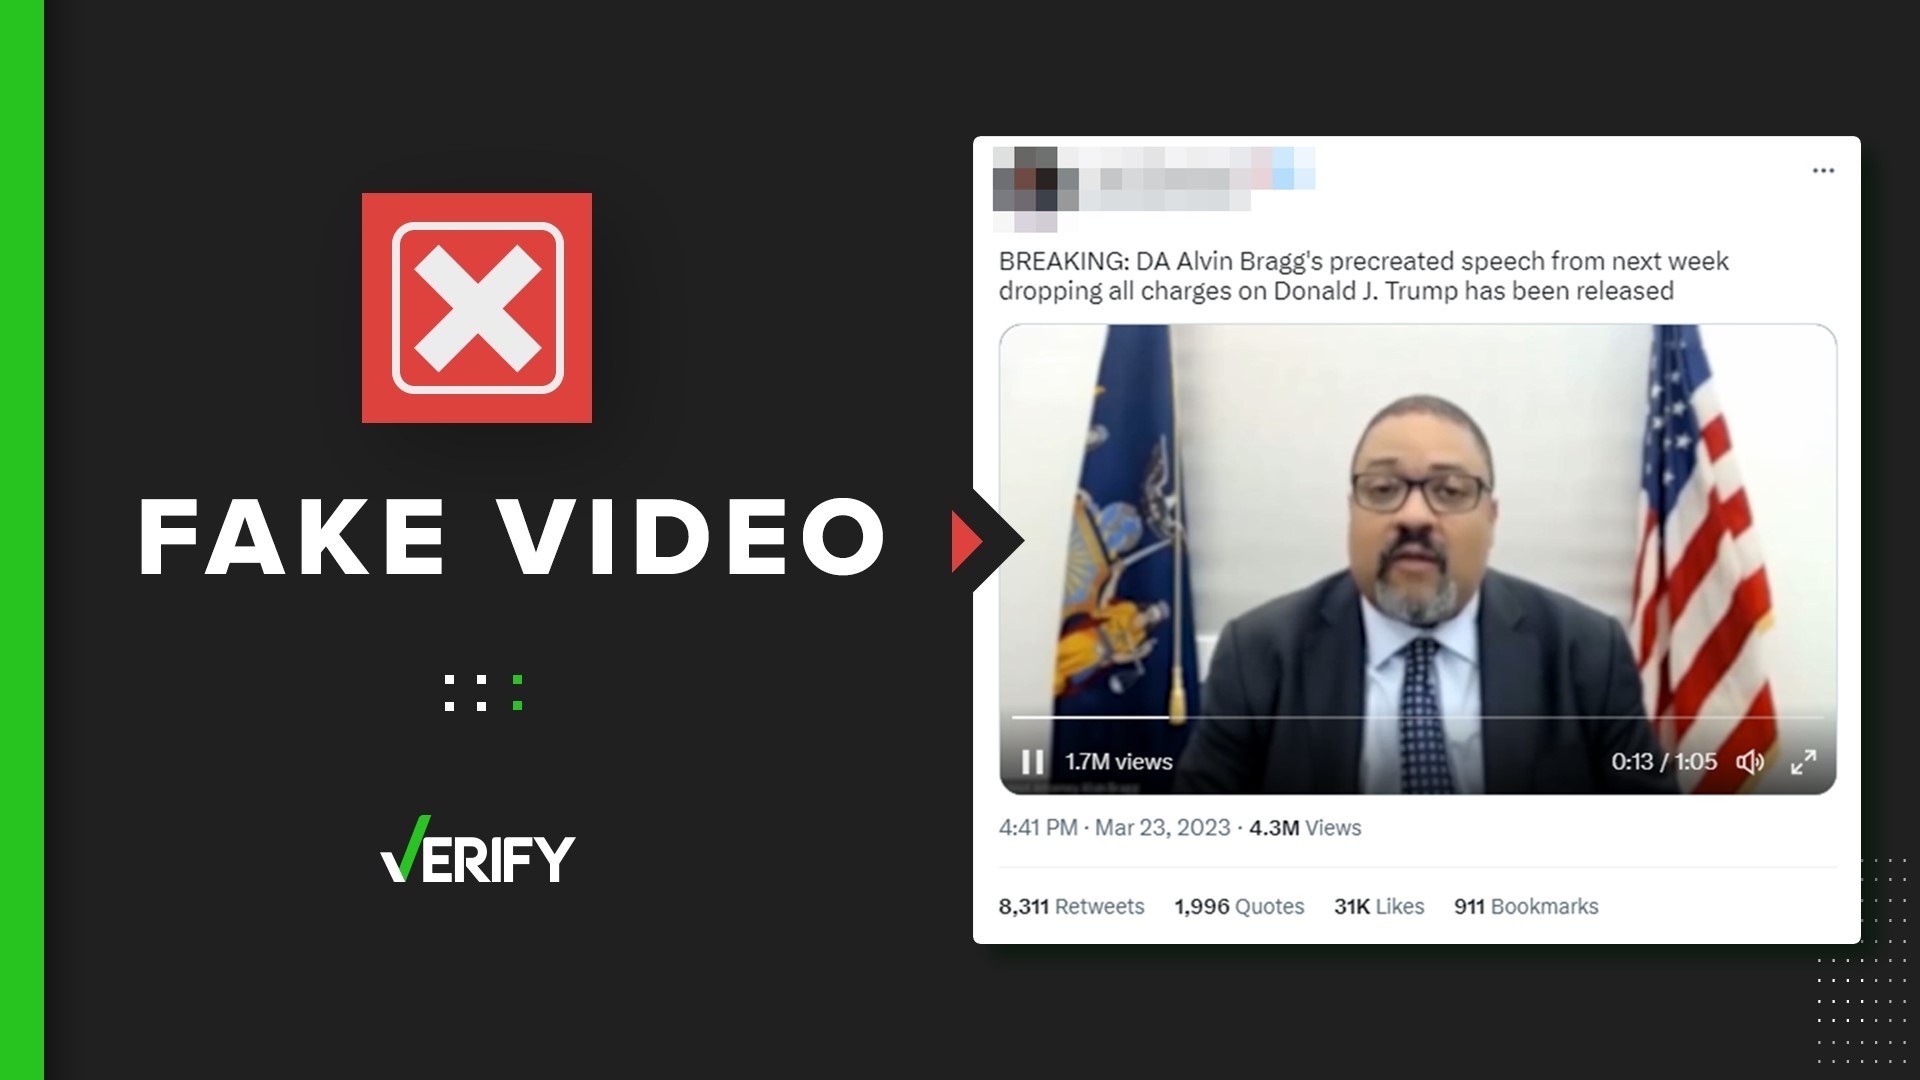 The fake video was created using an appearance Manhattan District Attorney Alvin Bragg made in January 2022. The criminal investigation into Trump isn’t closed.